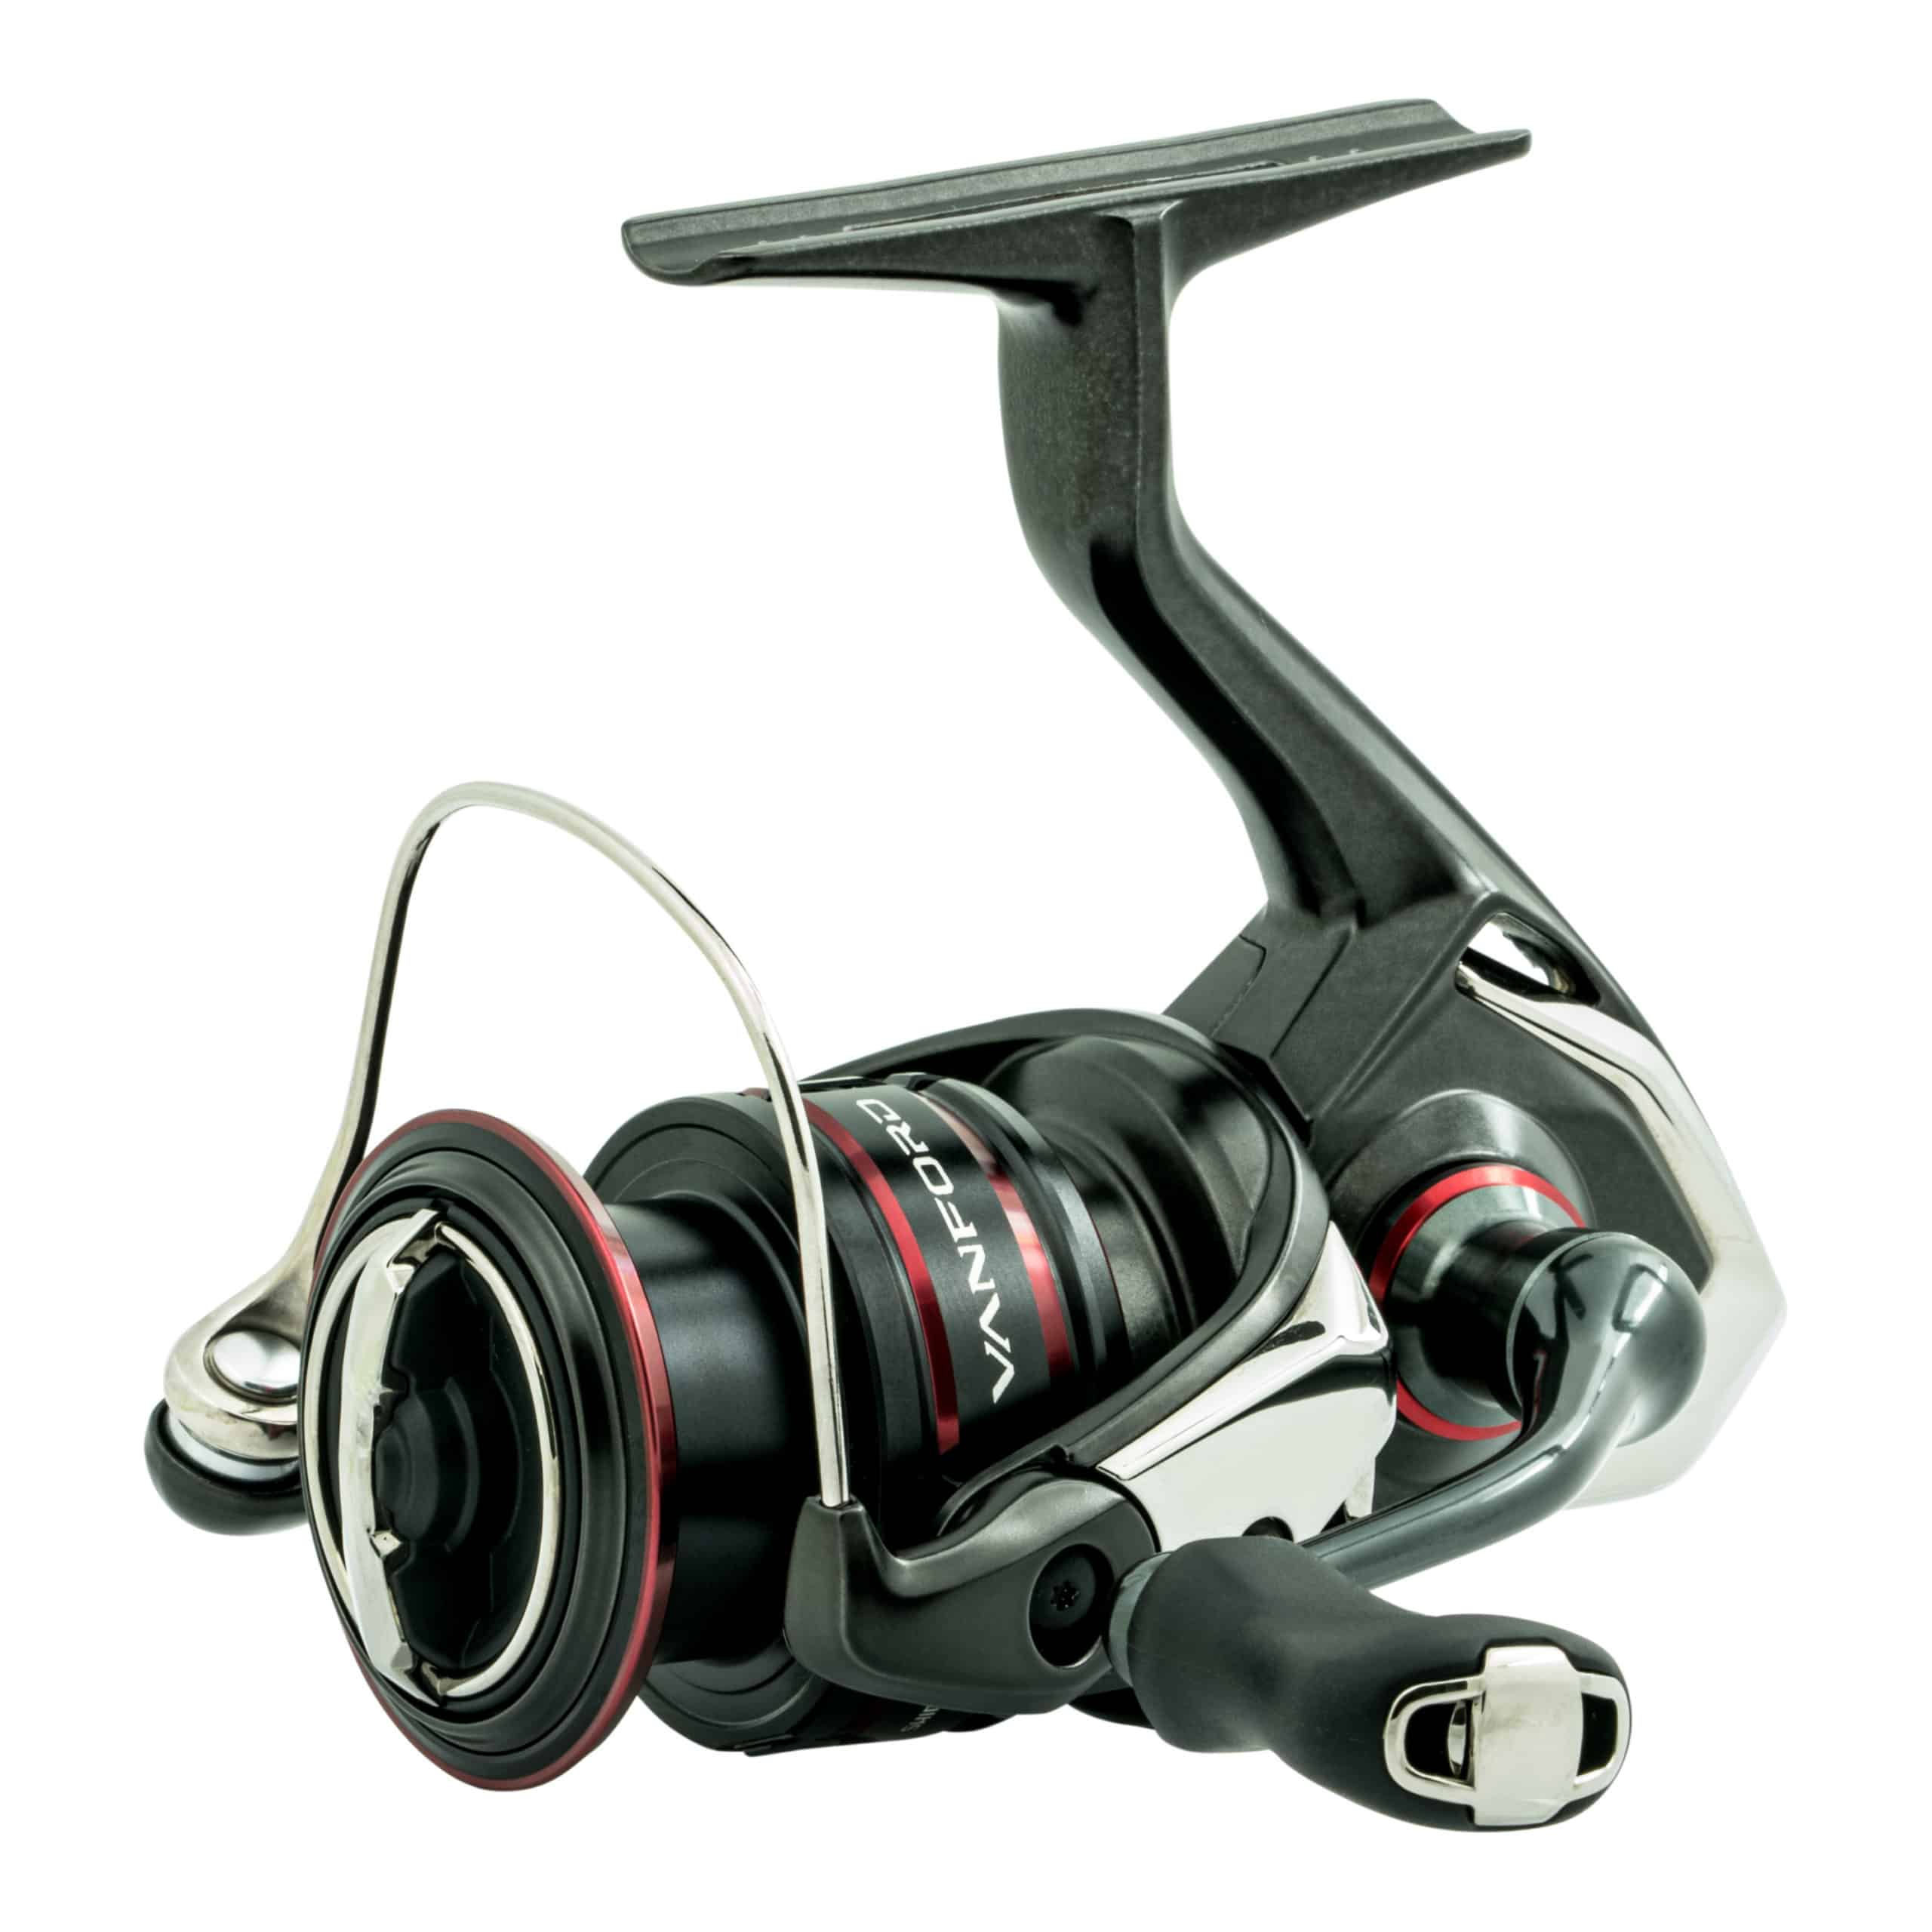 https://www.outdoorsfirst.com/bass/wp-content/uploads/sites/4/2020/07/Vanford-spinning-reel-ICAST-20-scaled.jpg